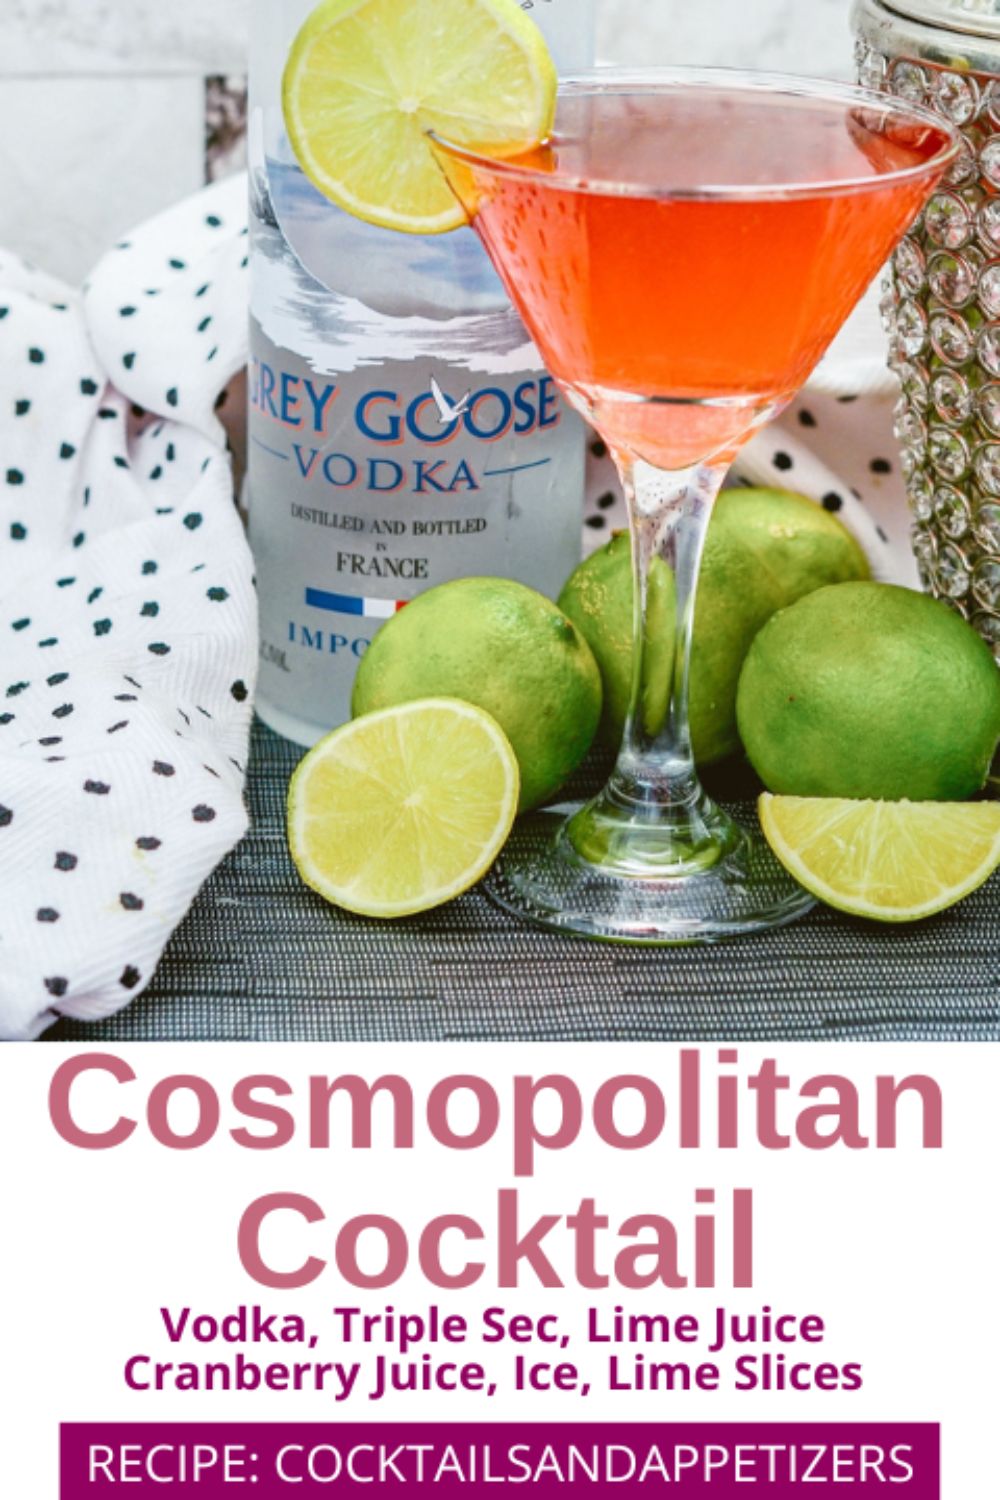 Cosmopolitan drink in a glass with limes around it.